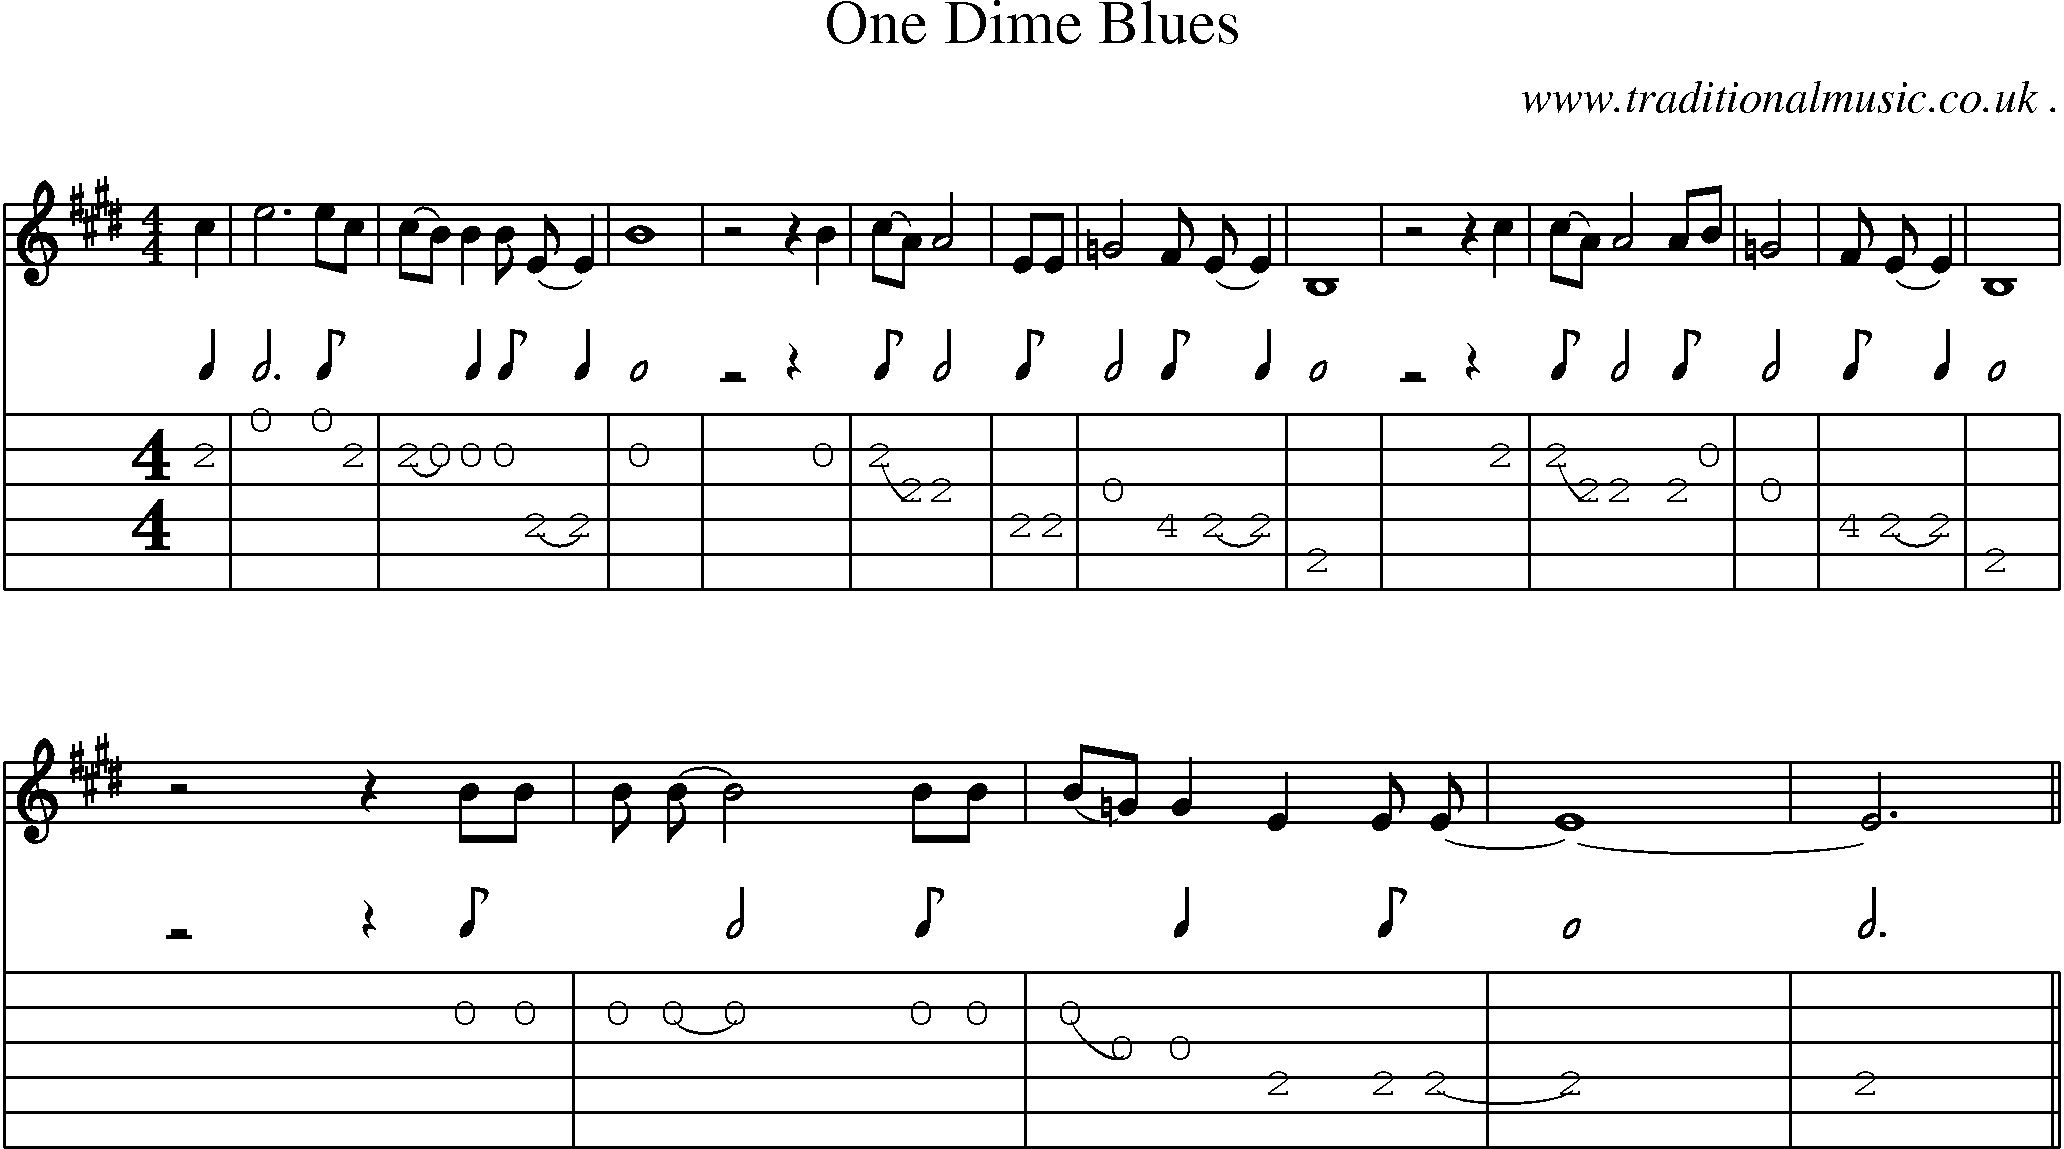 Music Score and Guitar Tabs for One Dime Blues